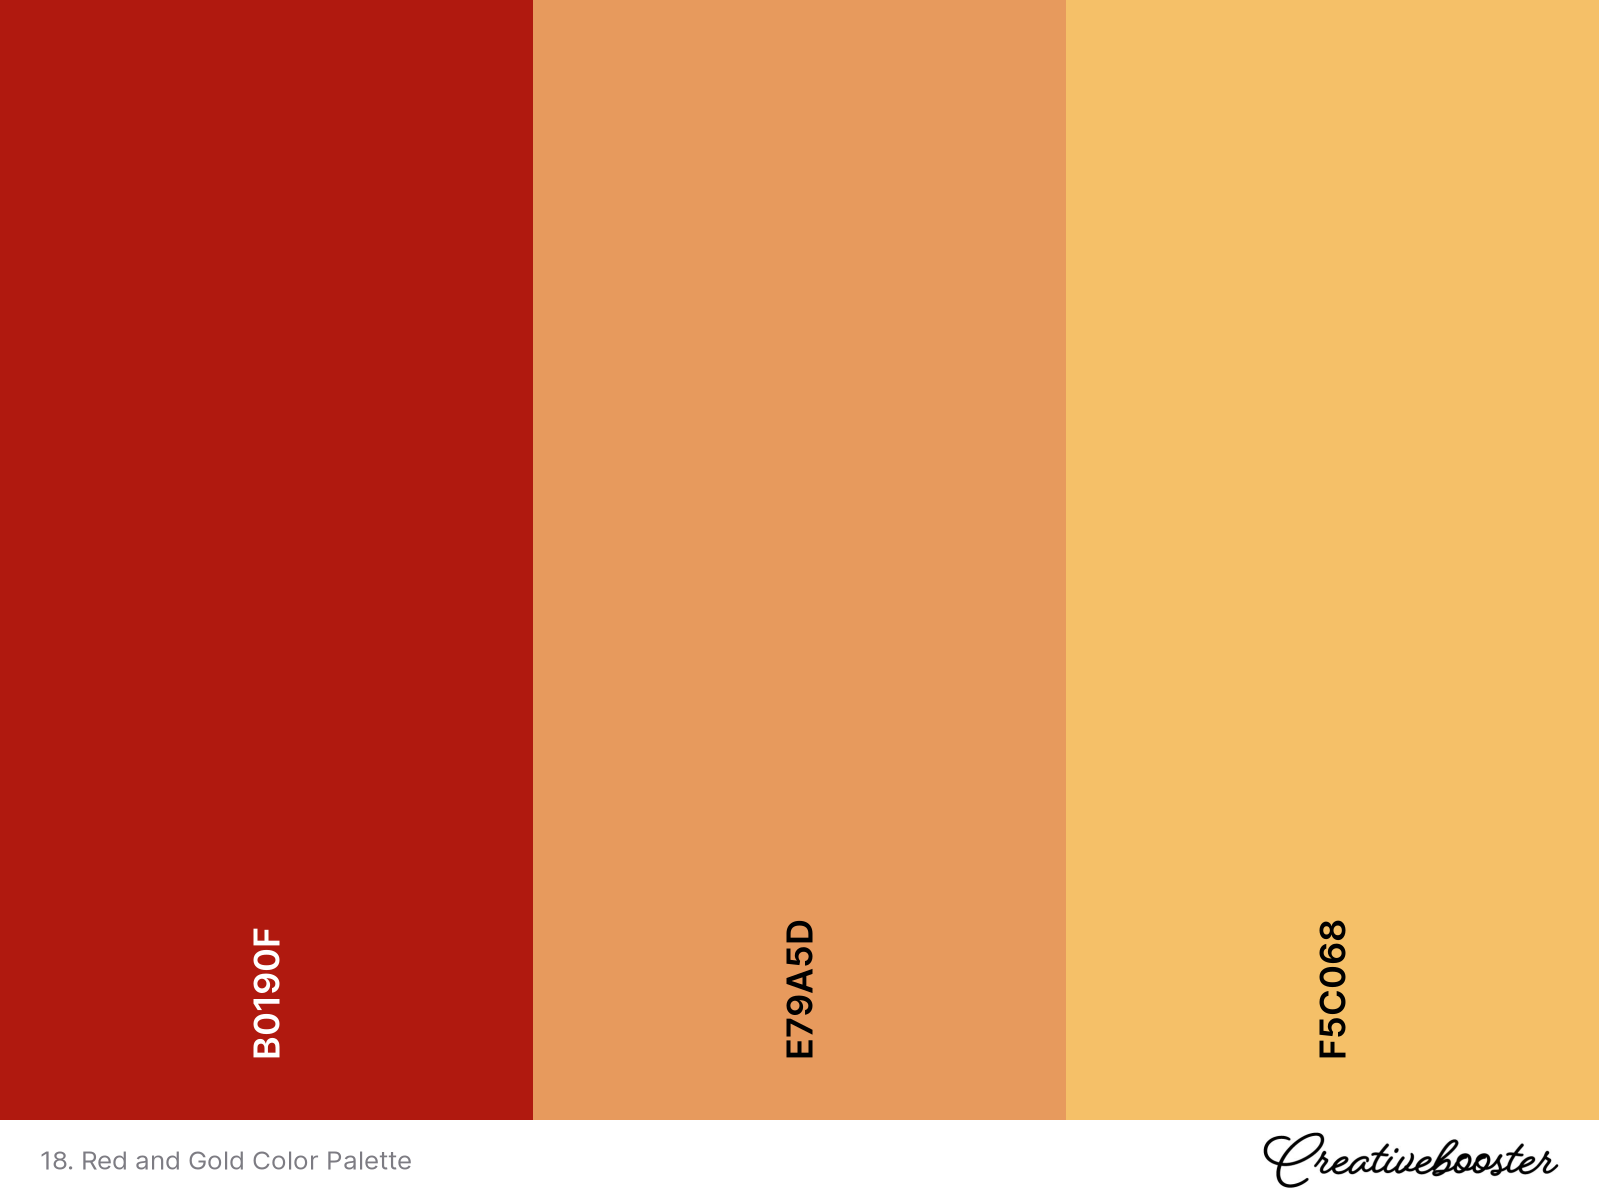 18. Red and Gold Color Palette